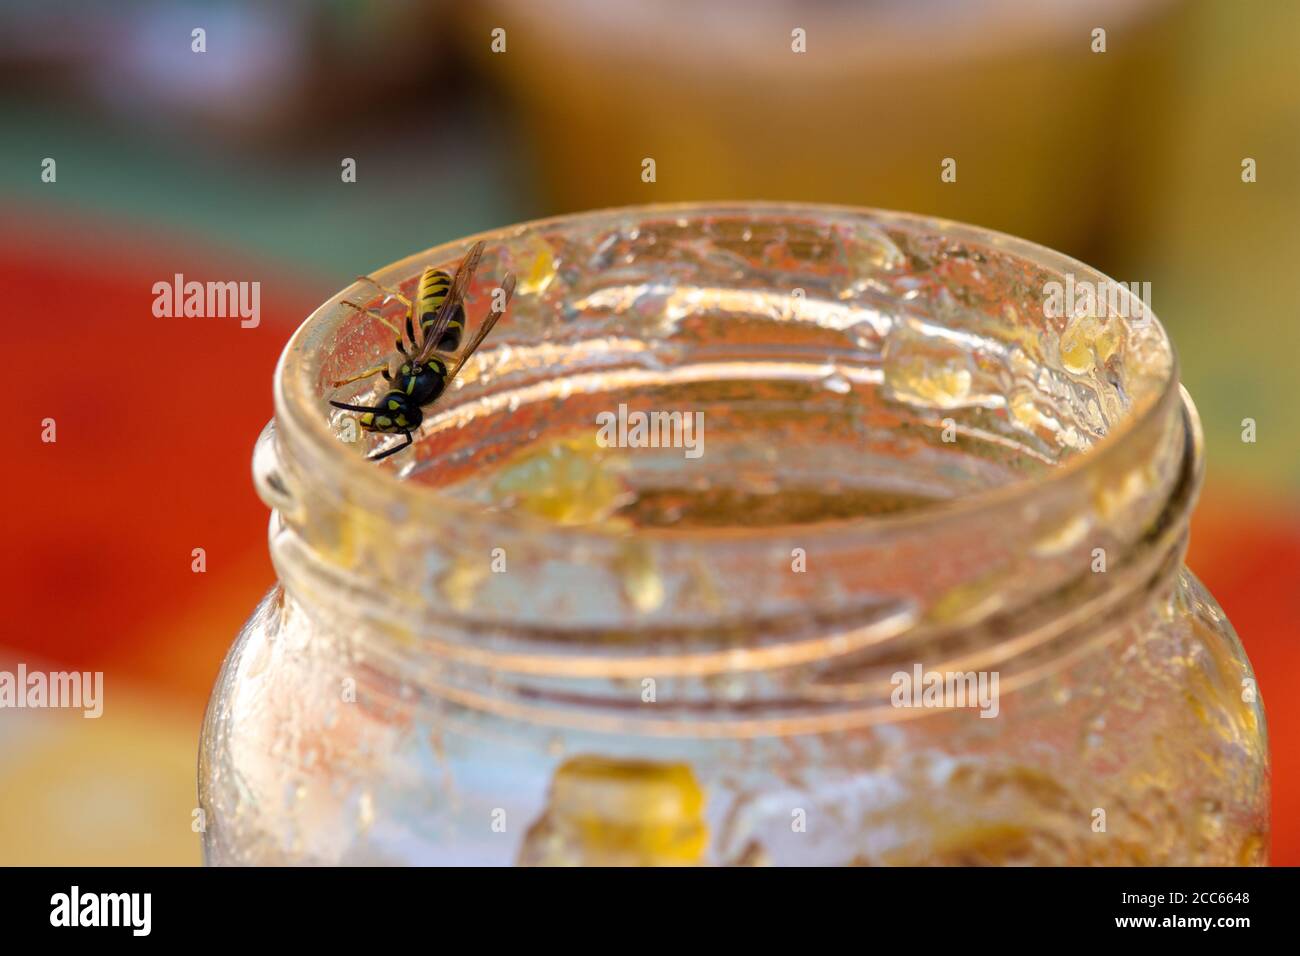 Dangers of the summer: wasp attracted to sugar exploring the rim of an open jar of jam. Colorful background Stock Photo